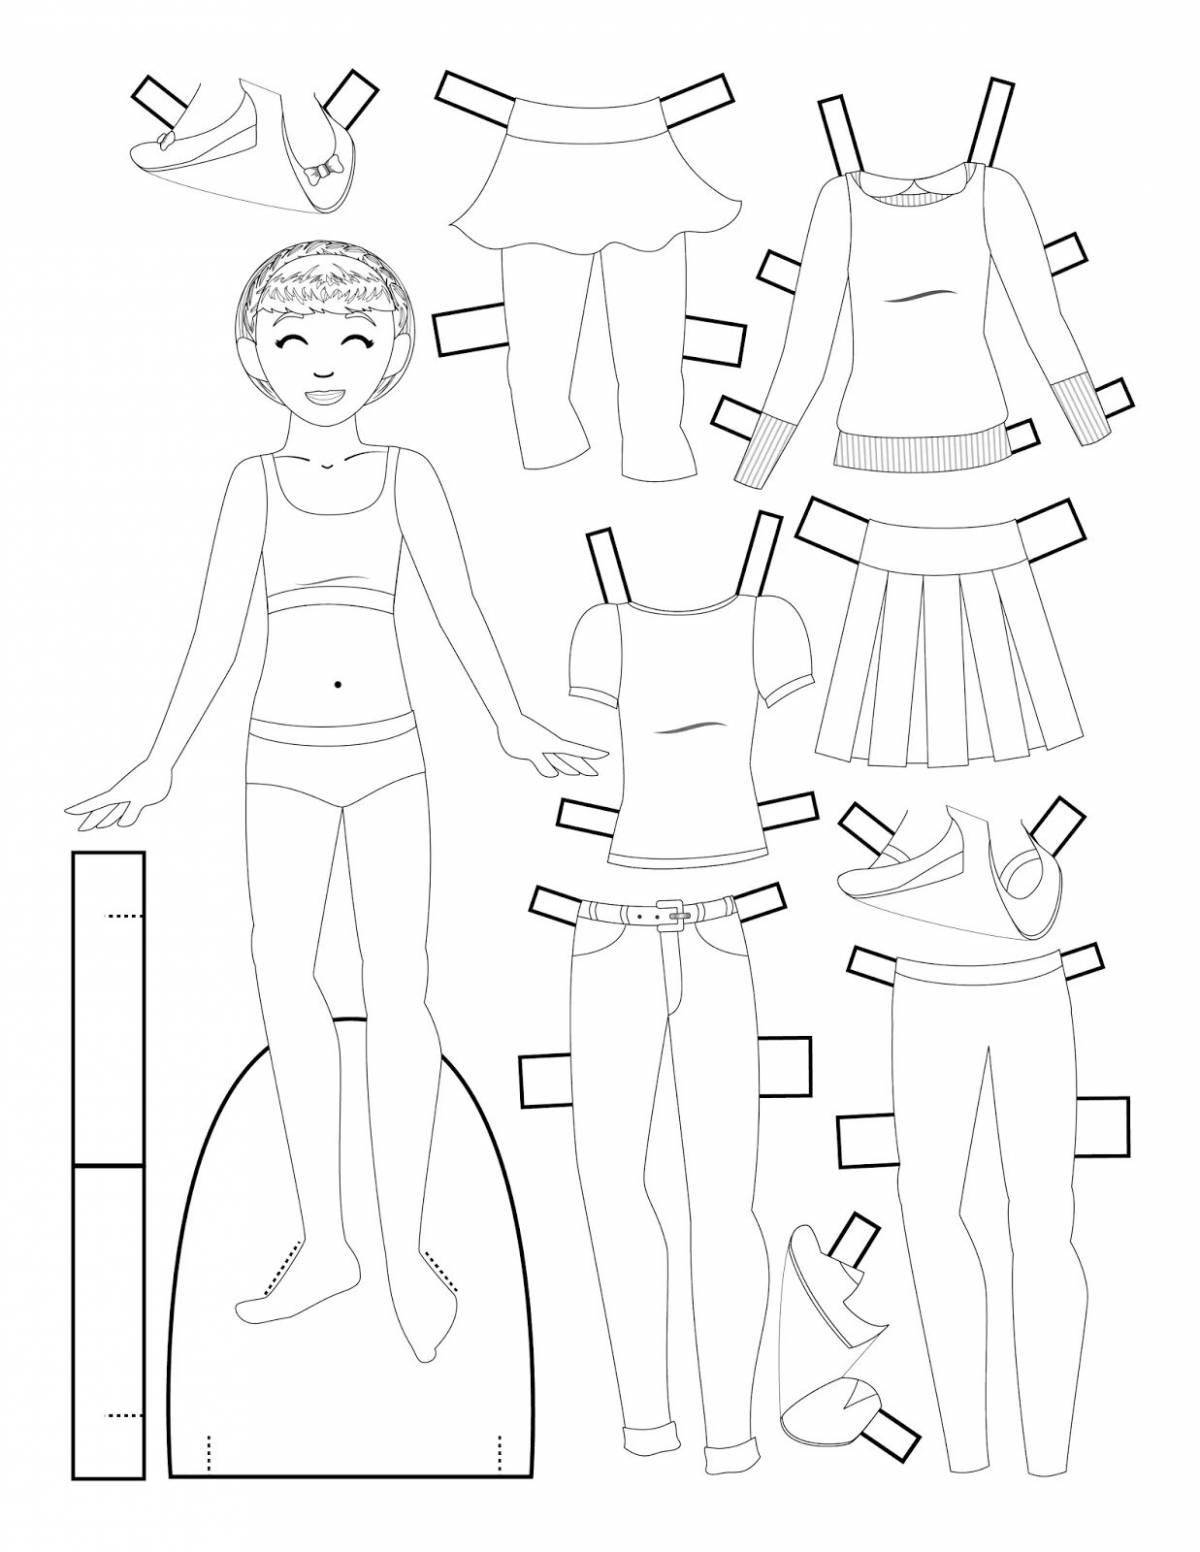 Paper doll boy with cutout clothes #6